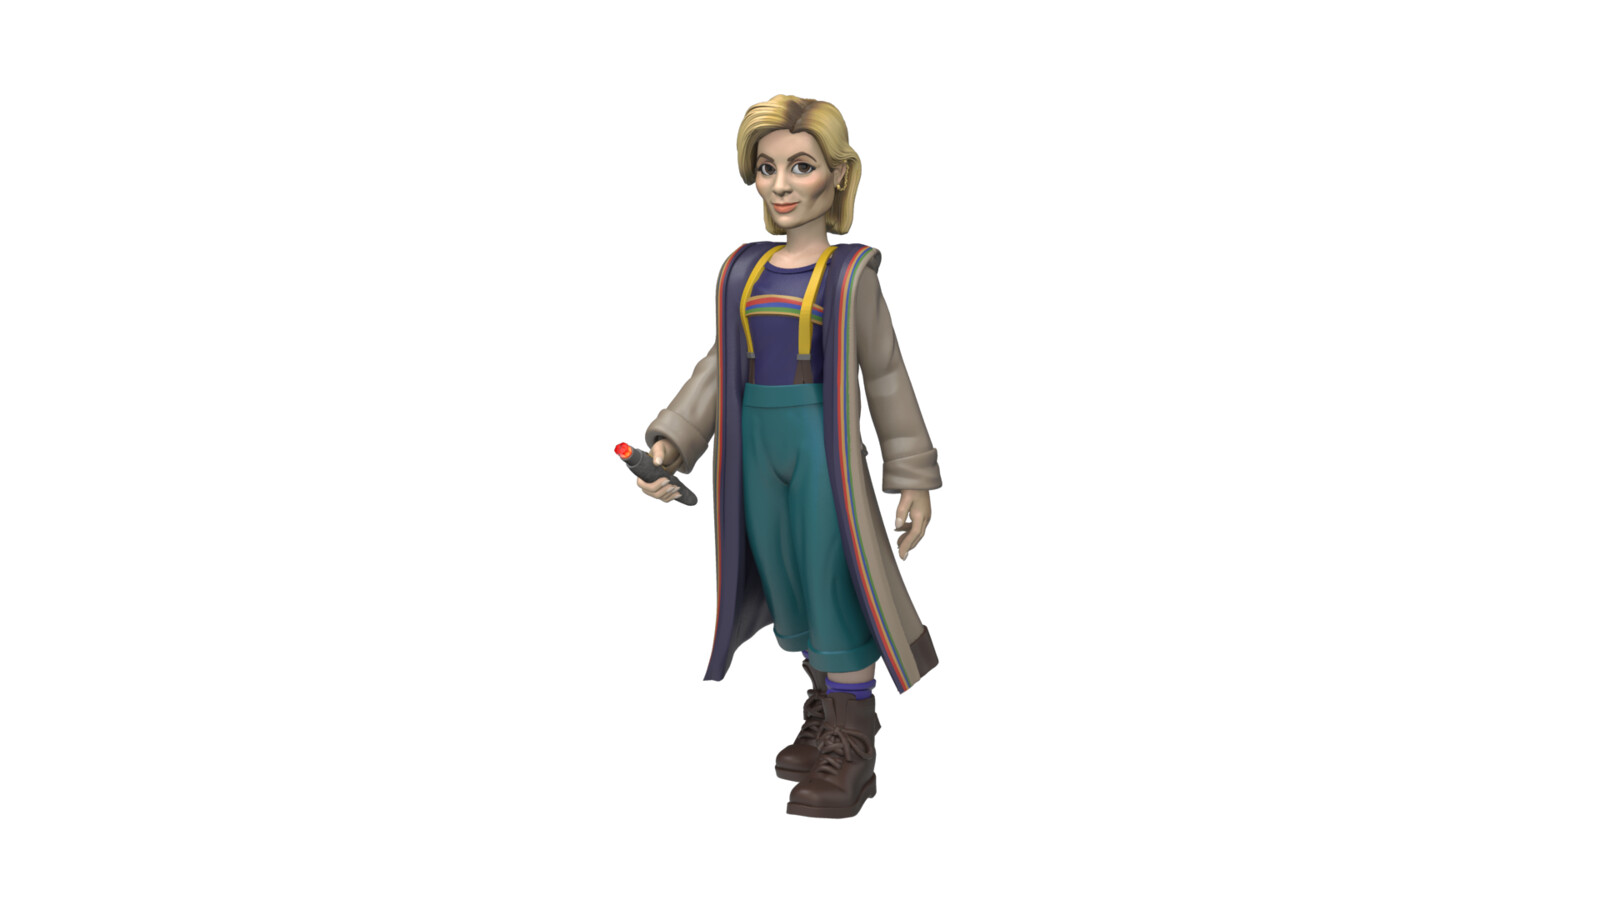 Updated sculpt of the 13th Doctor